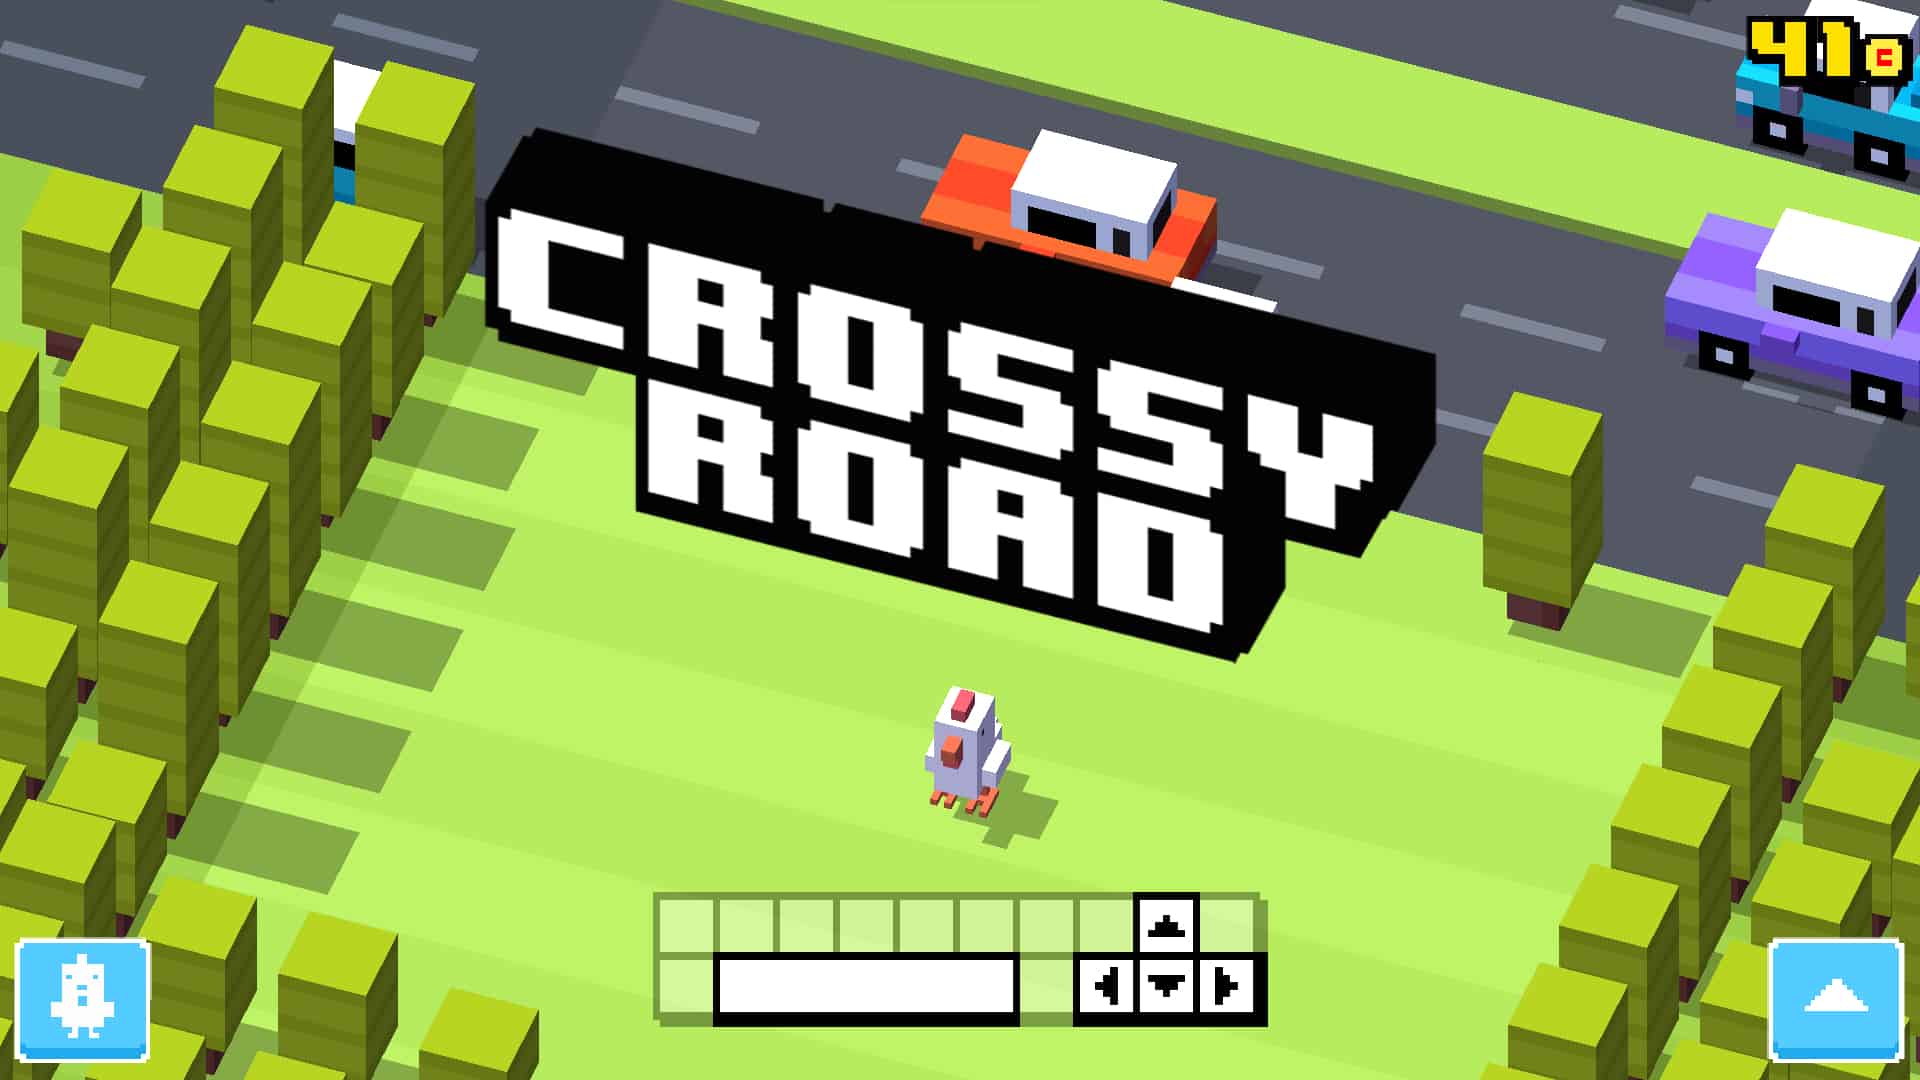 An in-game screenshot from Crossy Road.